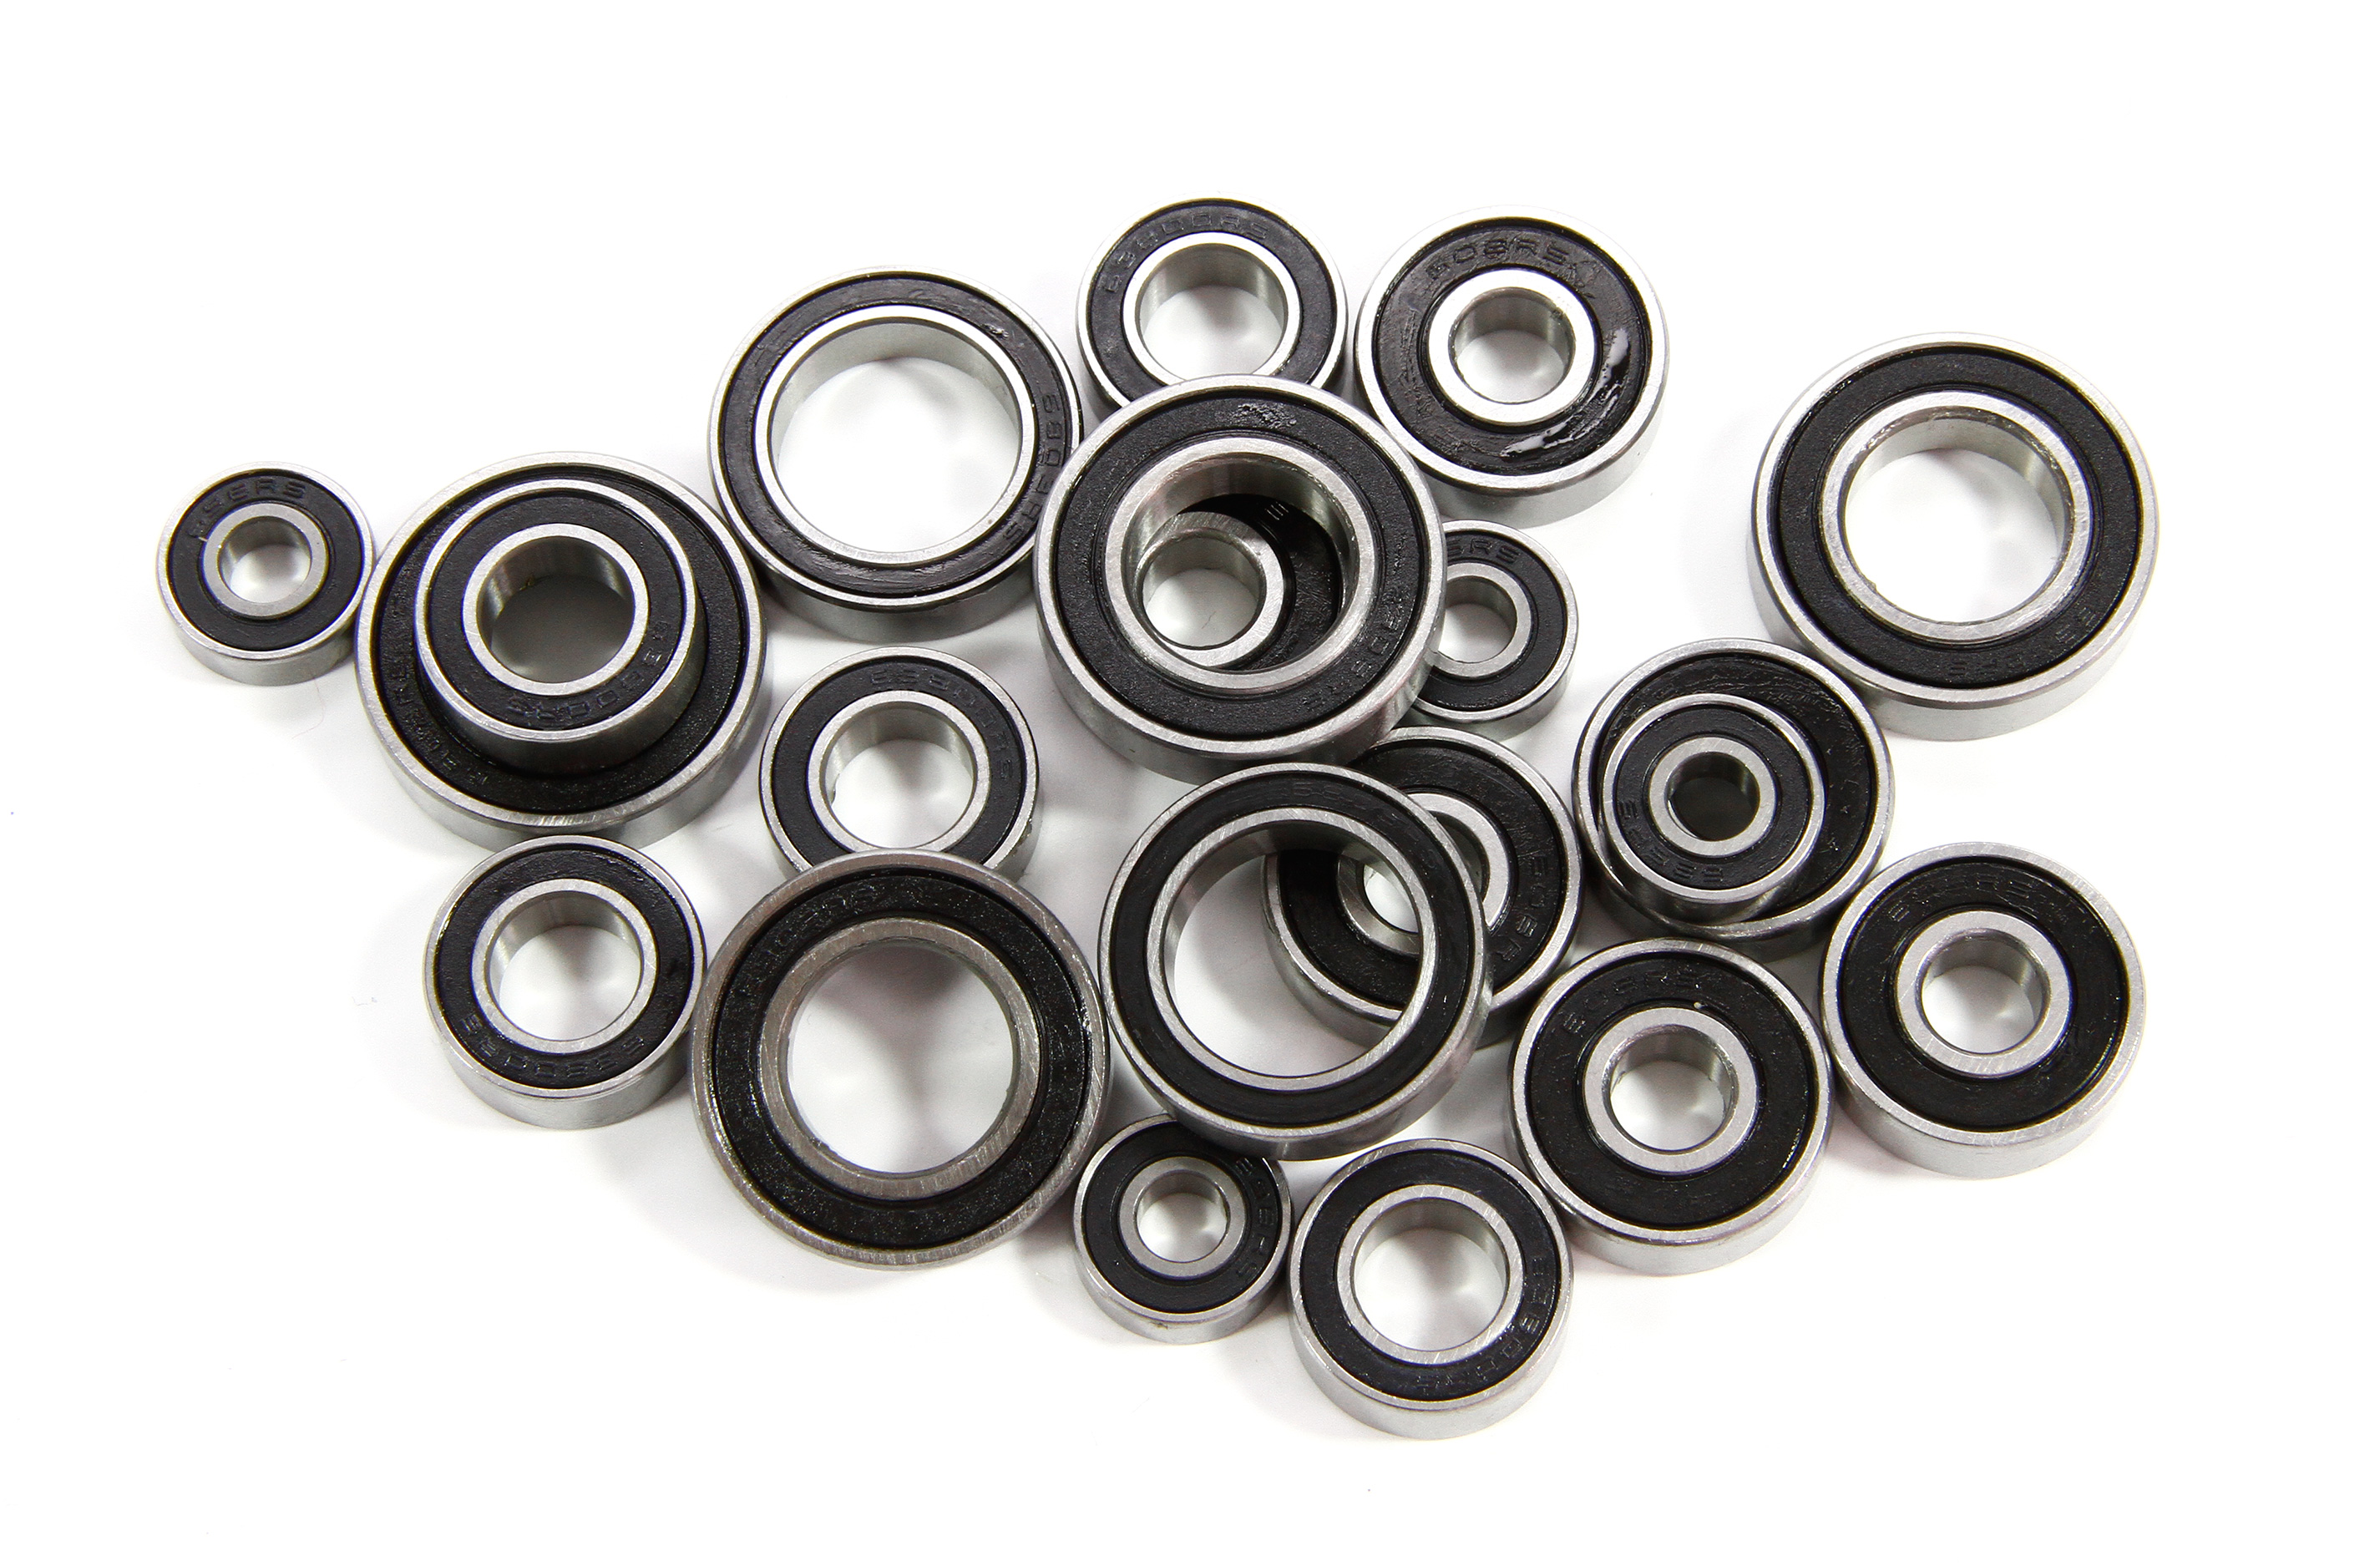 4411/12 FG ball bearing set for Leopard 4 Competition, sealed, 23 pcs.